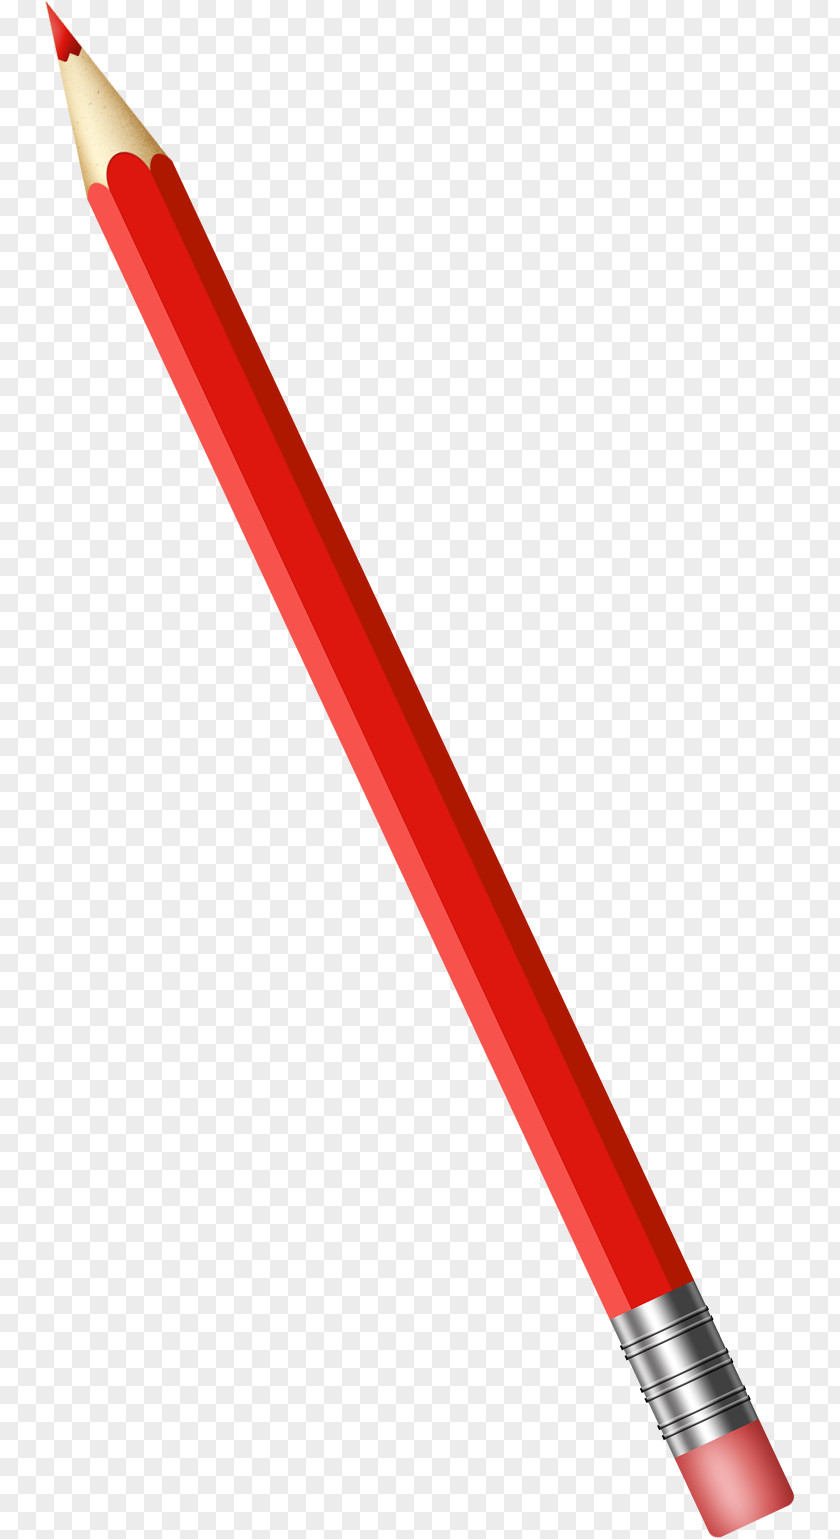 Red Pencil Sketch PNG